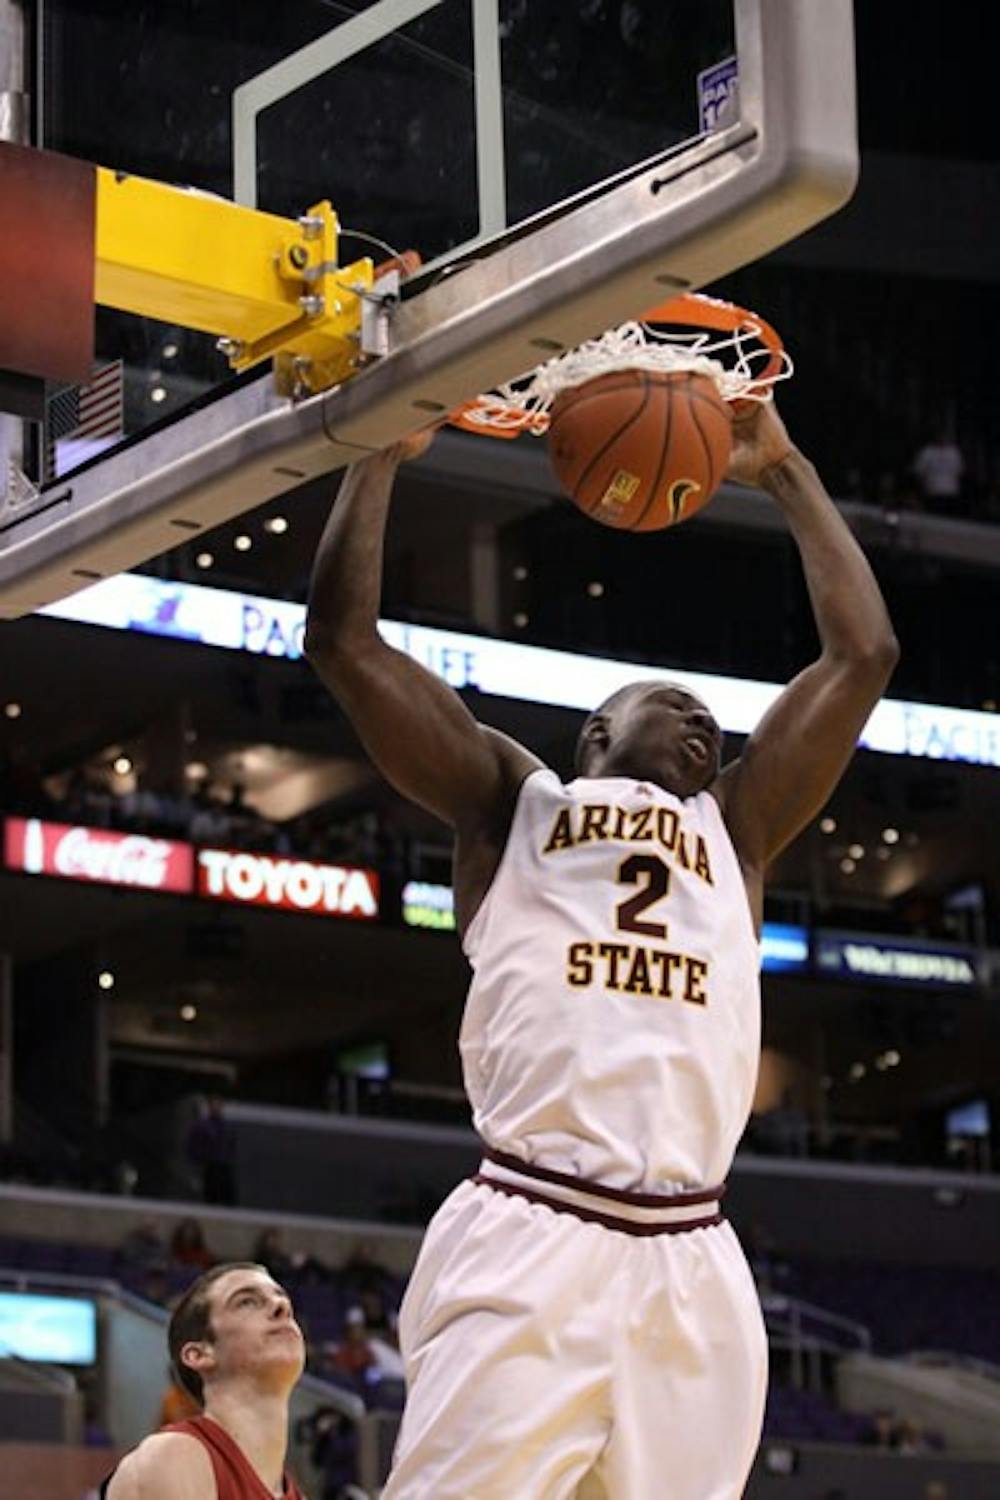 NOT ENOUGH: Senior center Eric Boateng slams home a dunk during ASU's 70-61 loss to Stanford in the Pac-10 Quarterfinals on Thursday at Staples Center in Los Angeles. ASU's NCAA Tournament hopes took a hit with the loss. (Photo Courtesy of Steve Rodriguez)